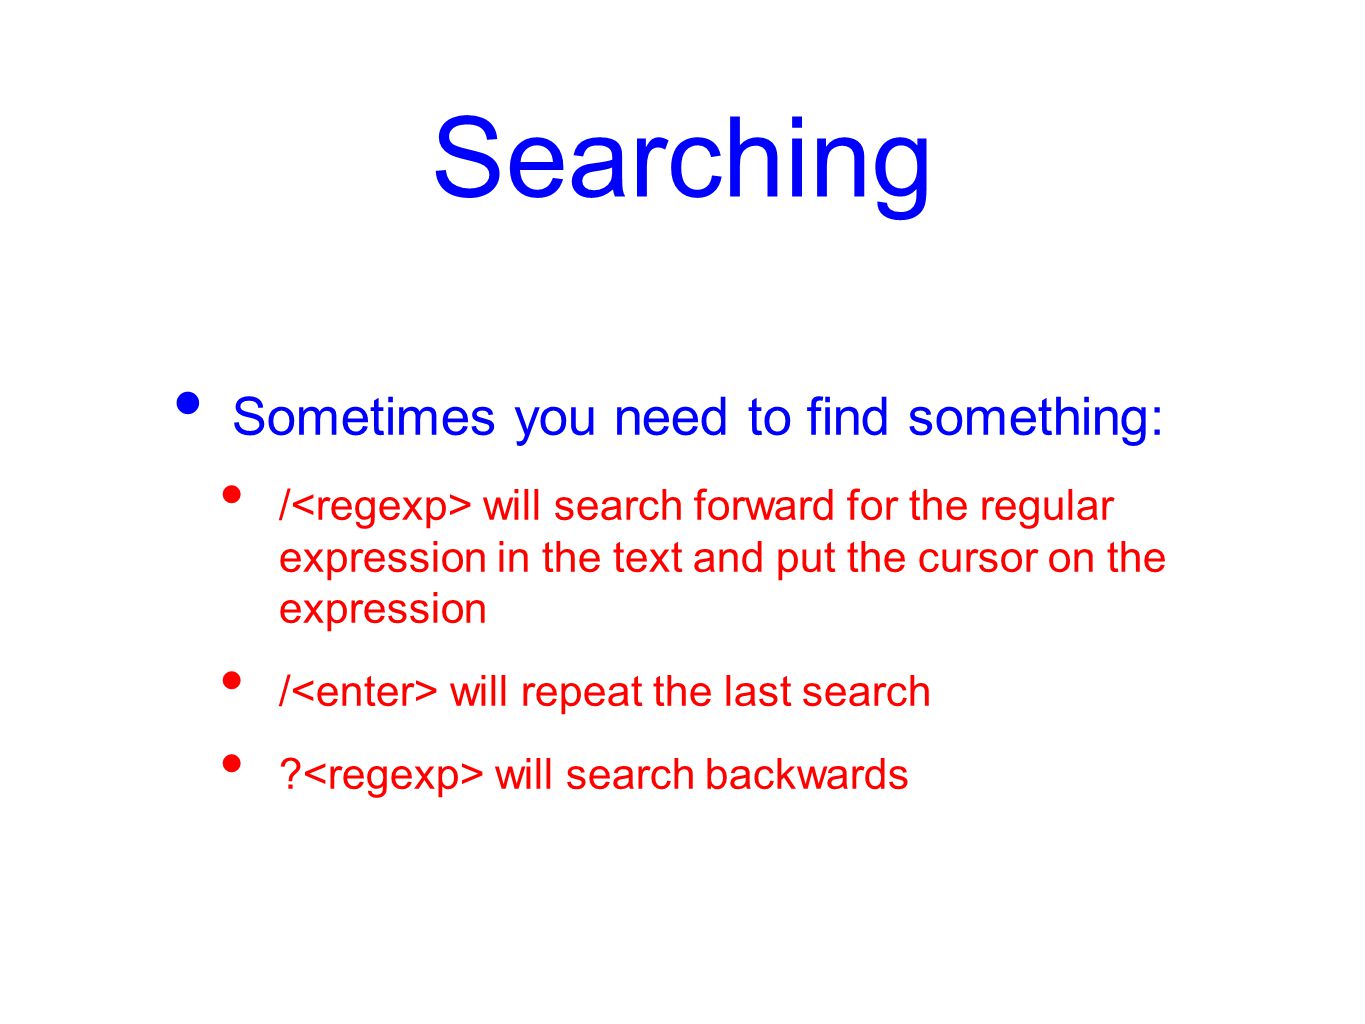 Searching Sometimes you need to find something: / will search forward for the regular expression in the text and put the cursor on the expression / will repeat the last search .